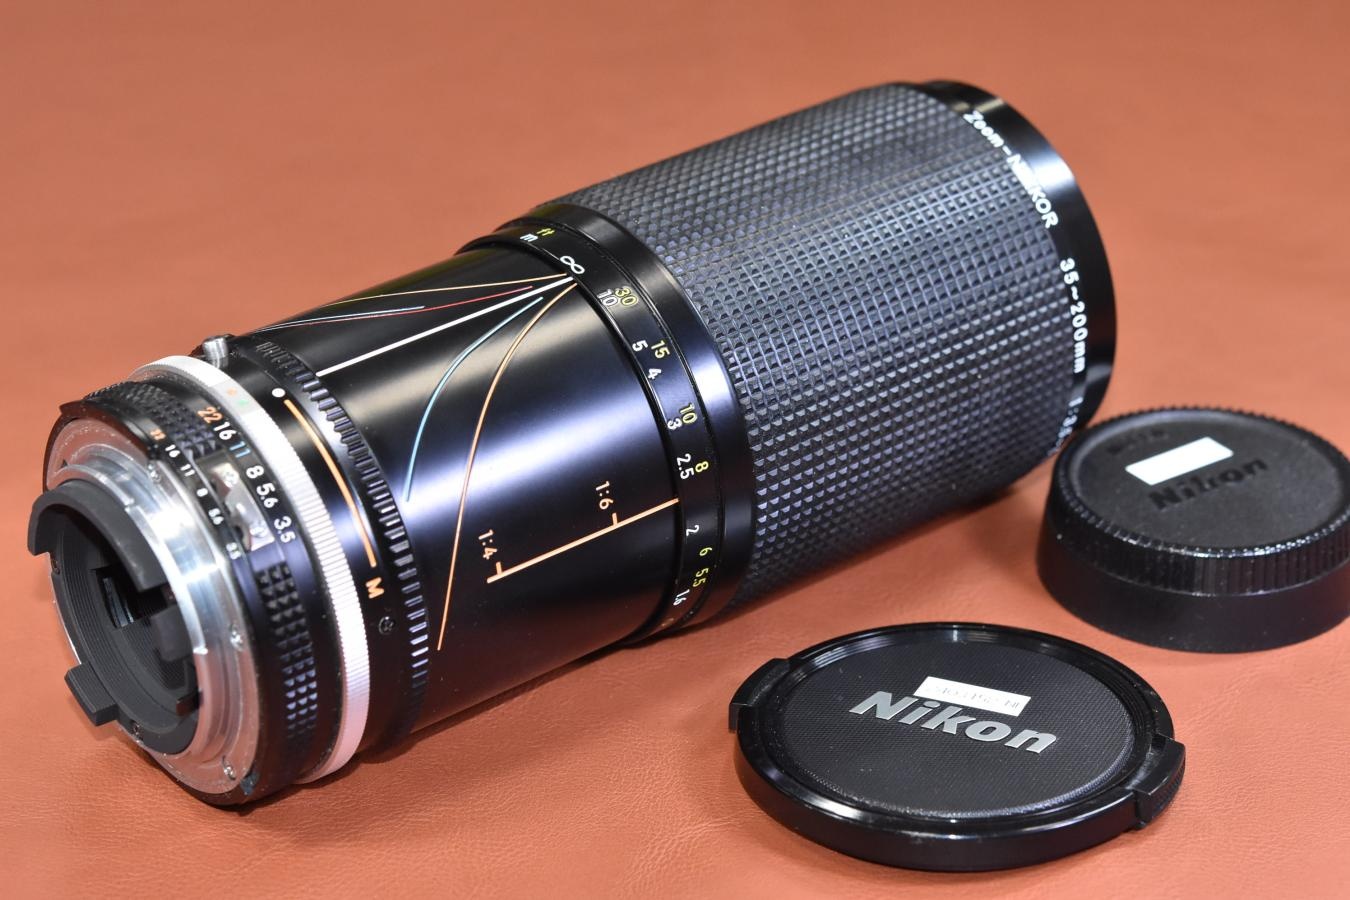 Ai-S NIKKOR 35-200mm F3.5-4.5